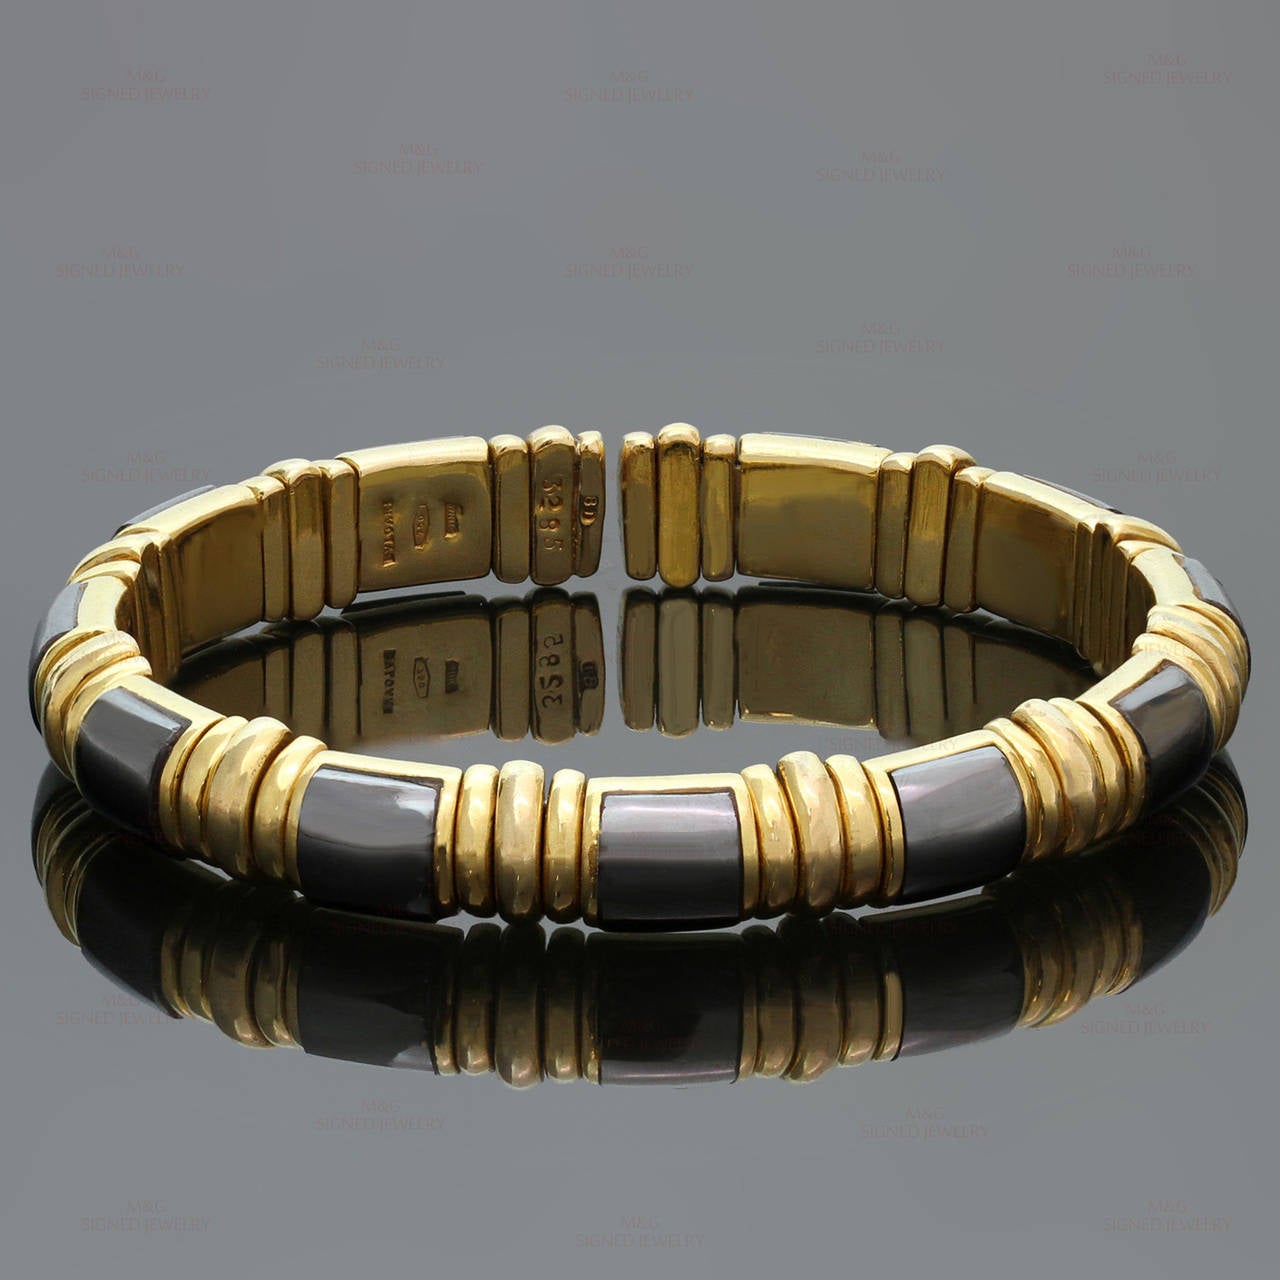 This elegant Bvlgari bangle is crafted in 18k yellow gold and inlaid with hematite. Bracelet has adjustable length from 6 to 7.25 inches. Made in Italy circa 1980s. Measurements: 0.31